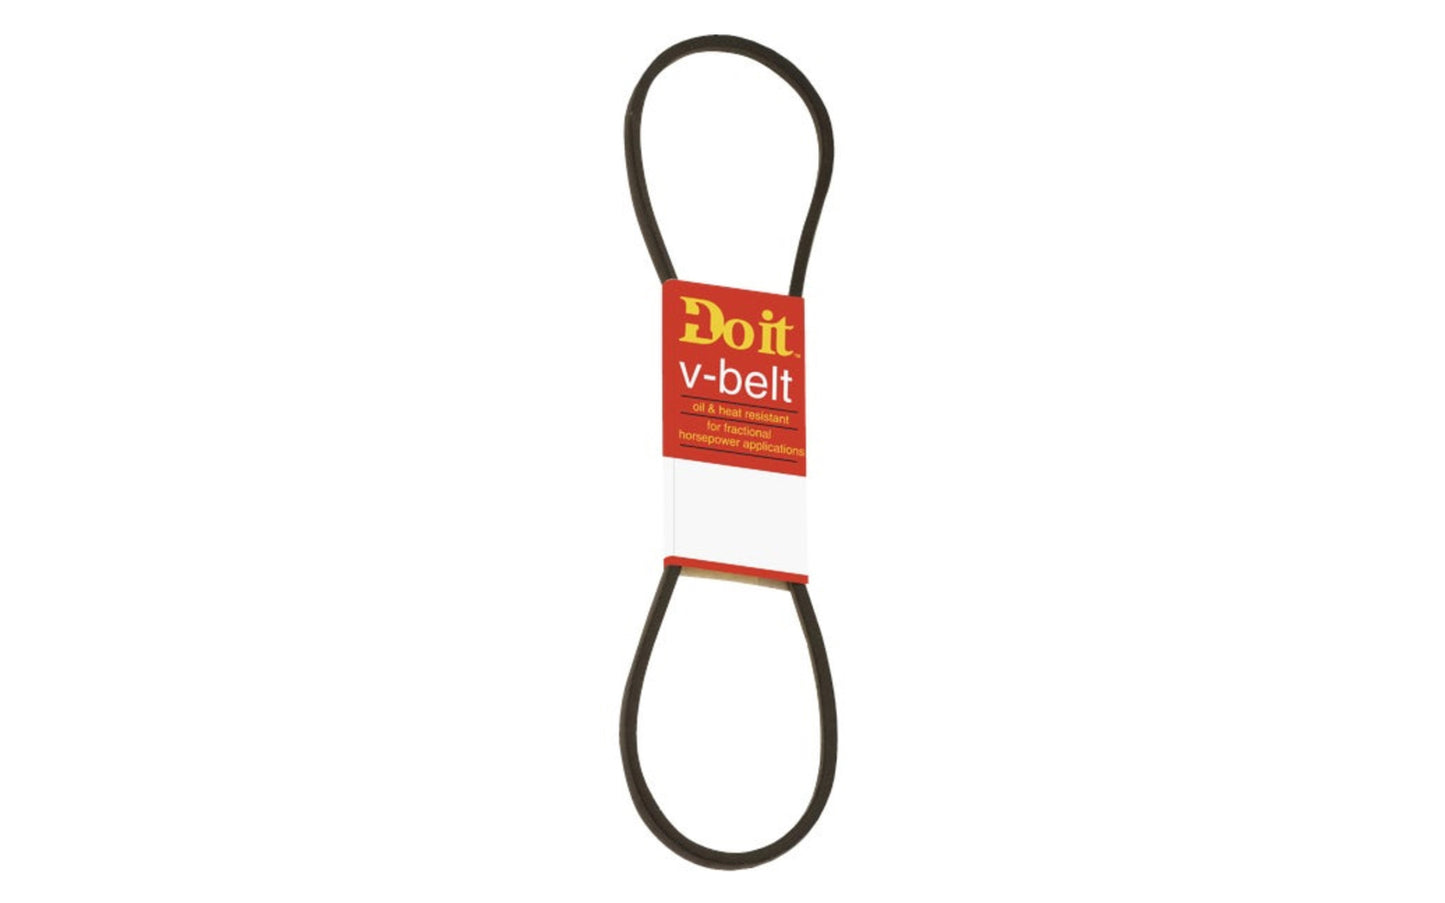 17" Long x 1/2" Width V-Belt - 4L170. Oil & heat resistant. Recommended for 1-3 HP (horsepower) light-duty applications. Typically the best option for electric powered applications. For refrigerators, washing machines, pumps, stokers, woodworking machines. Pulley type: A-Pulley.